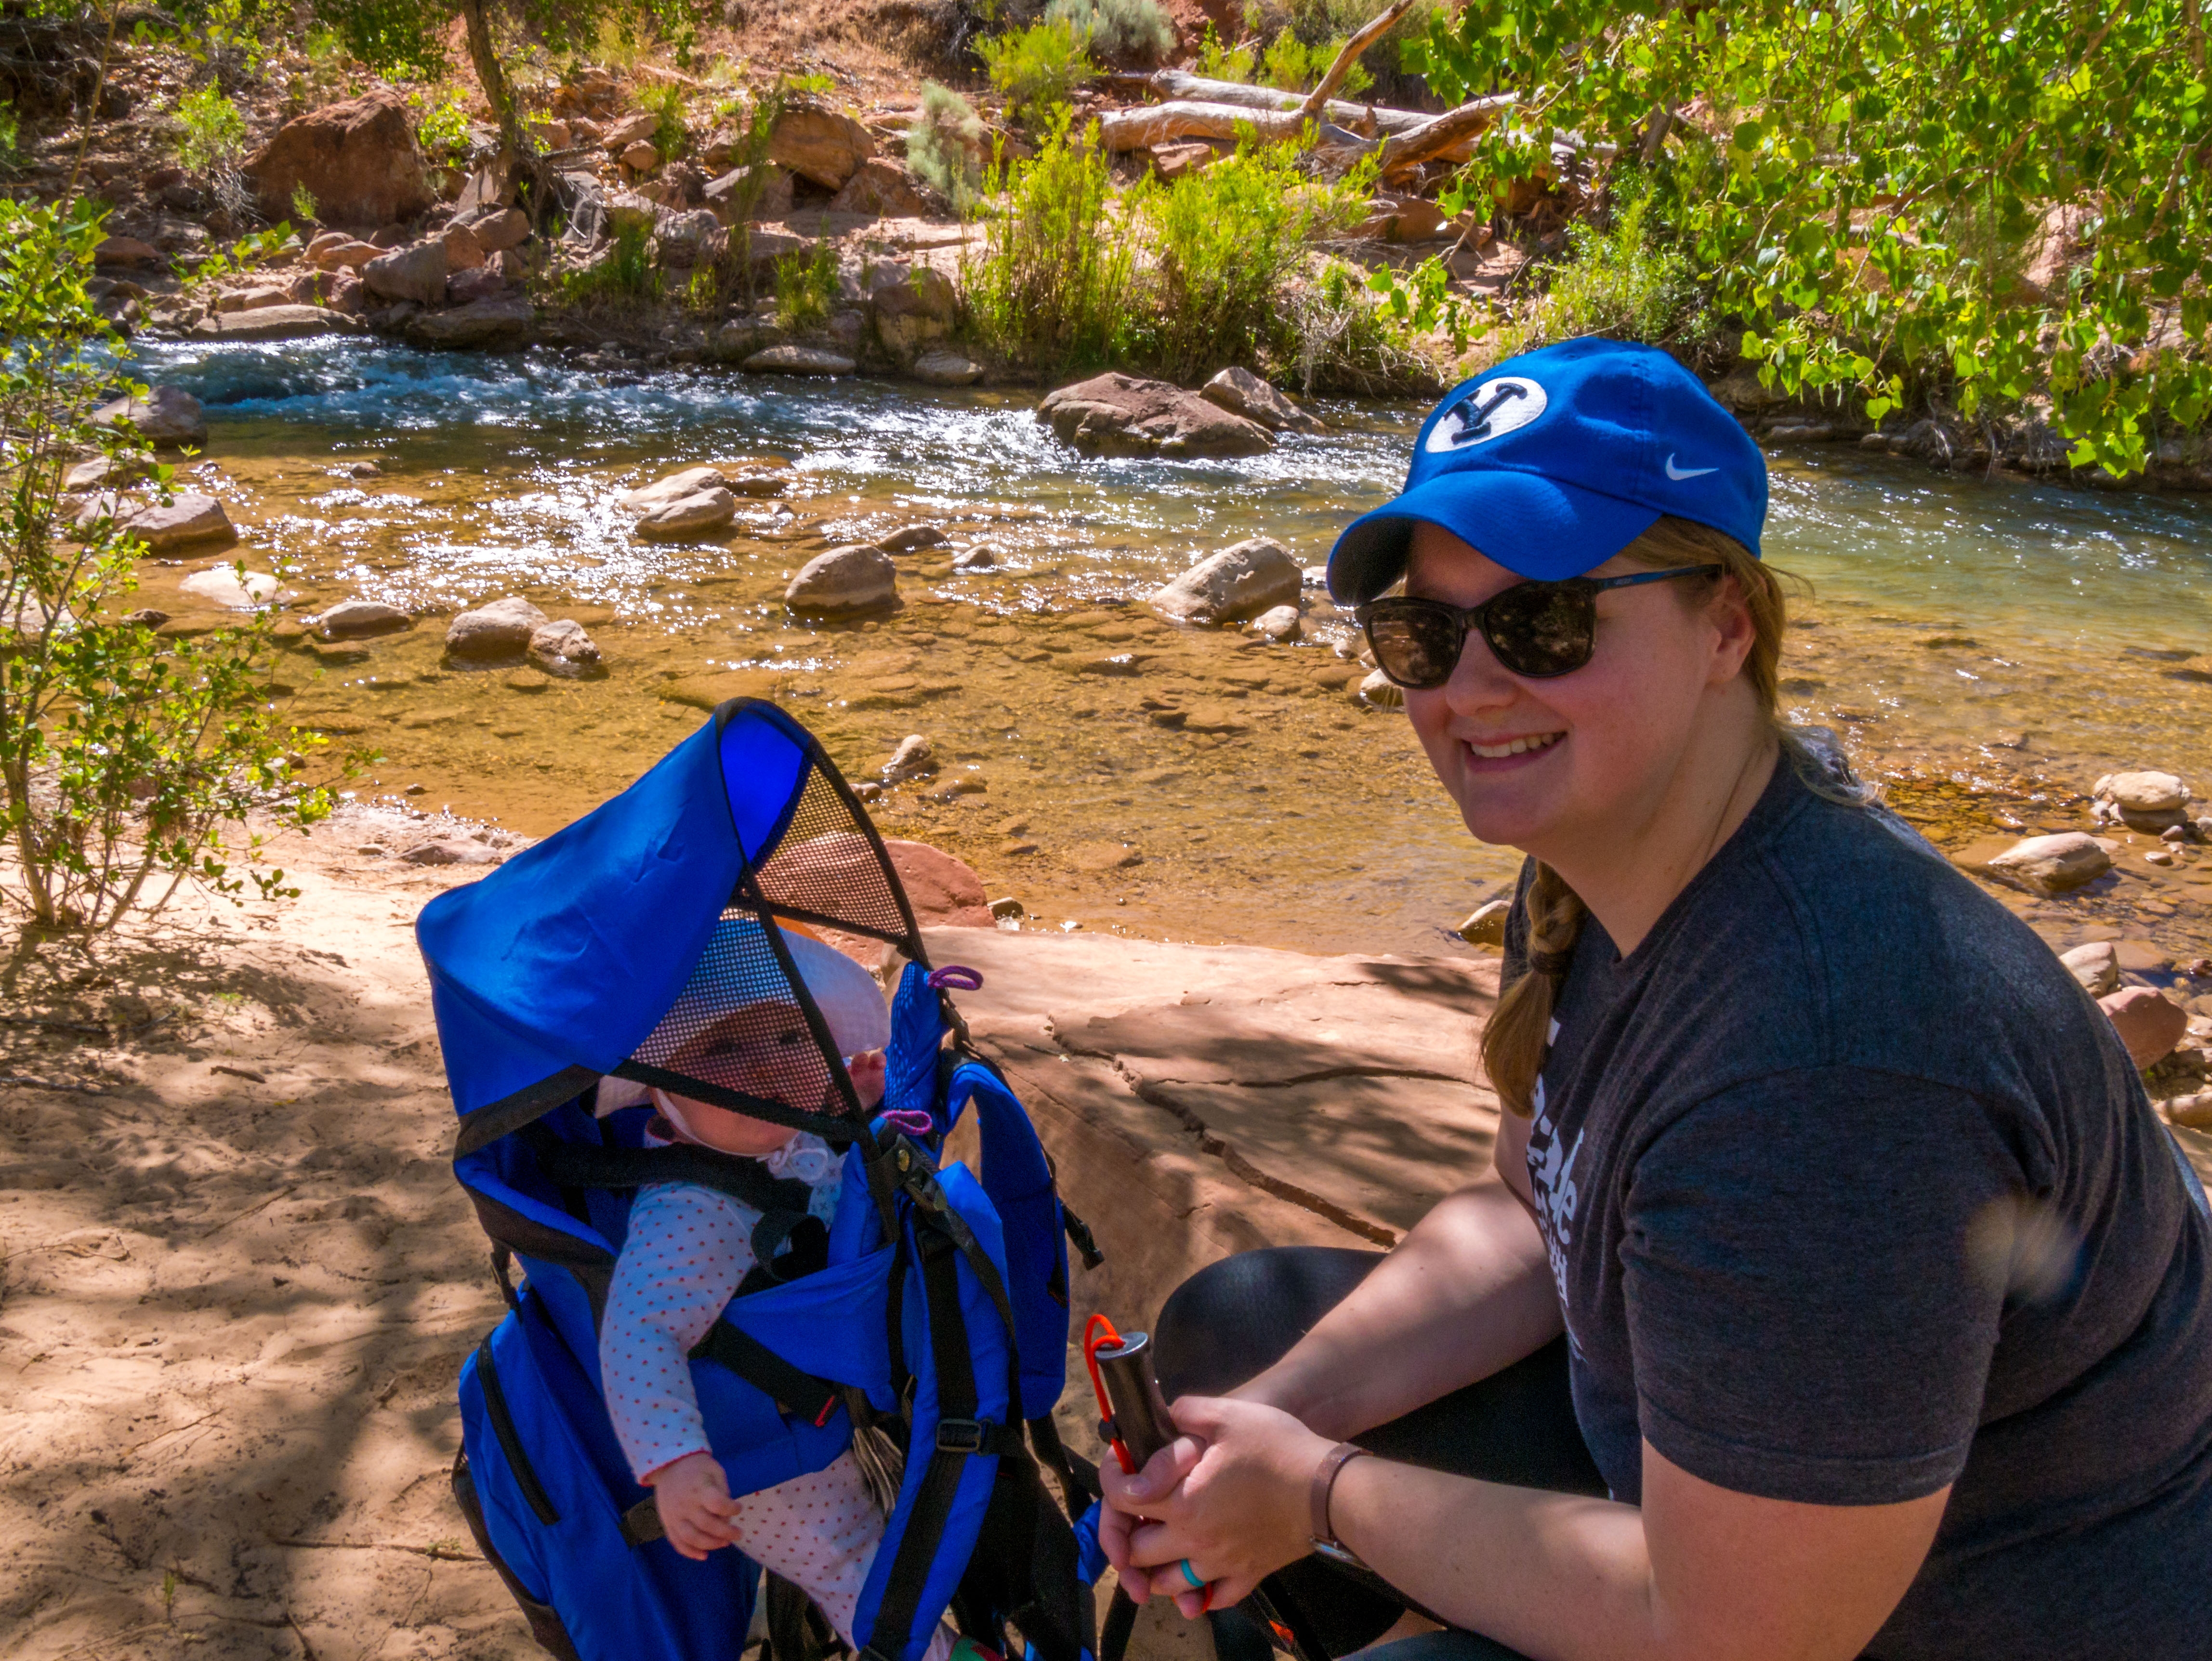 Meagan and baby on the Pa'rus Trail in Zion National Park